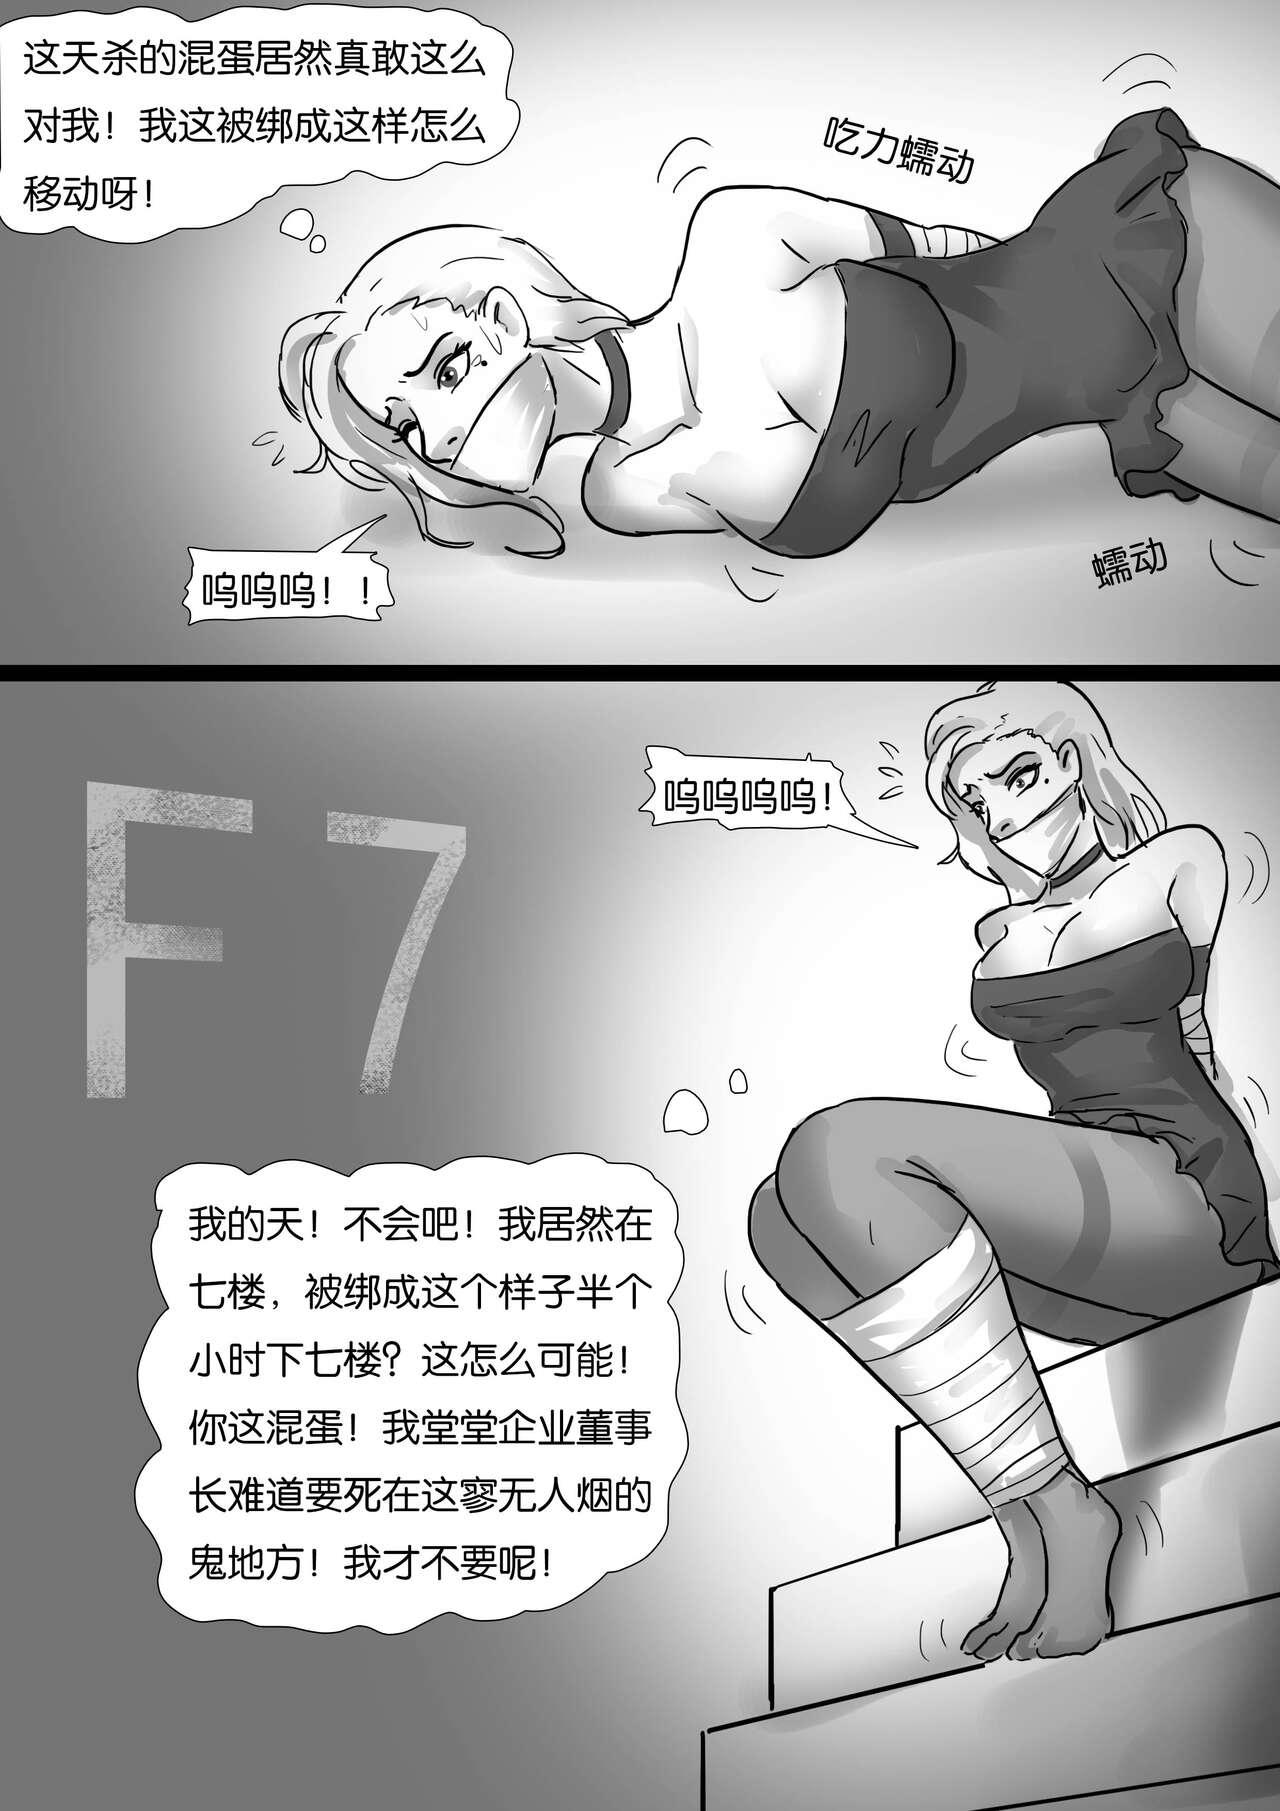 Masseuse 生死时速 Time Chacing Reversecowgirl - Page 8